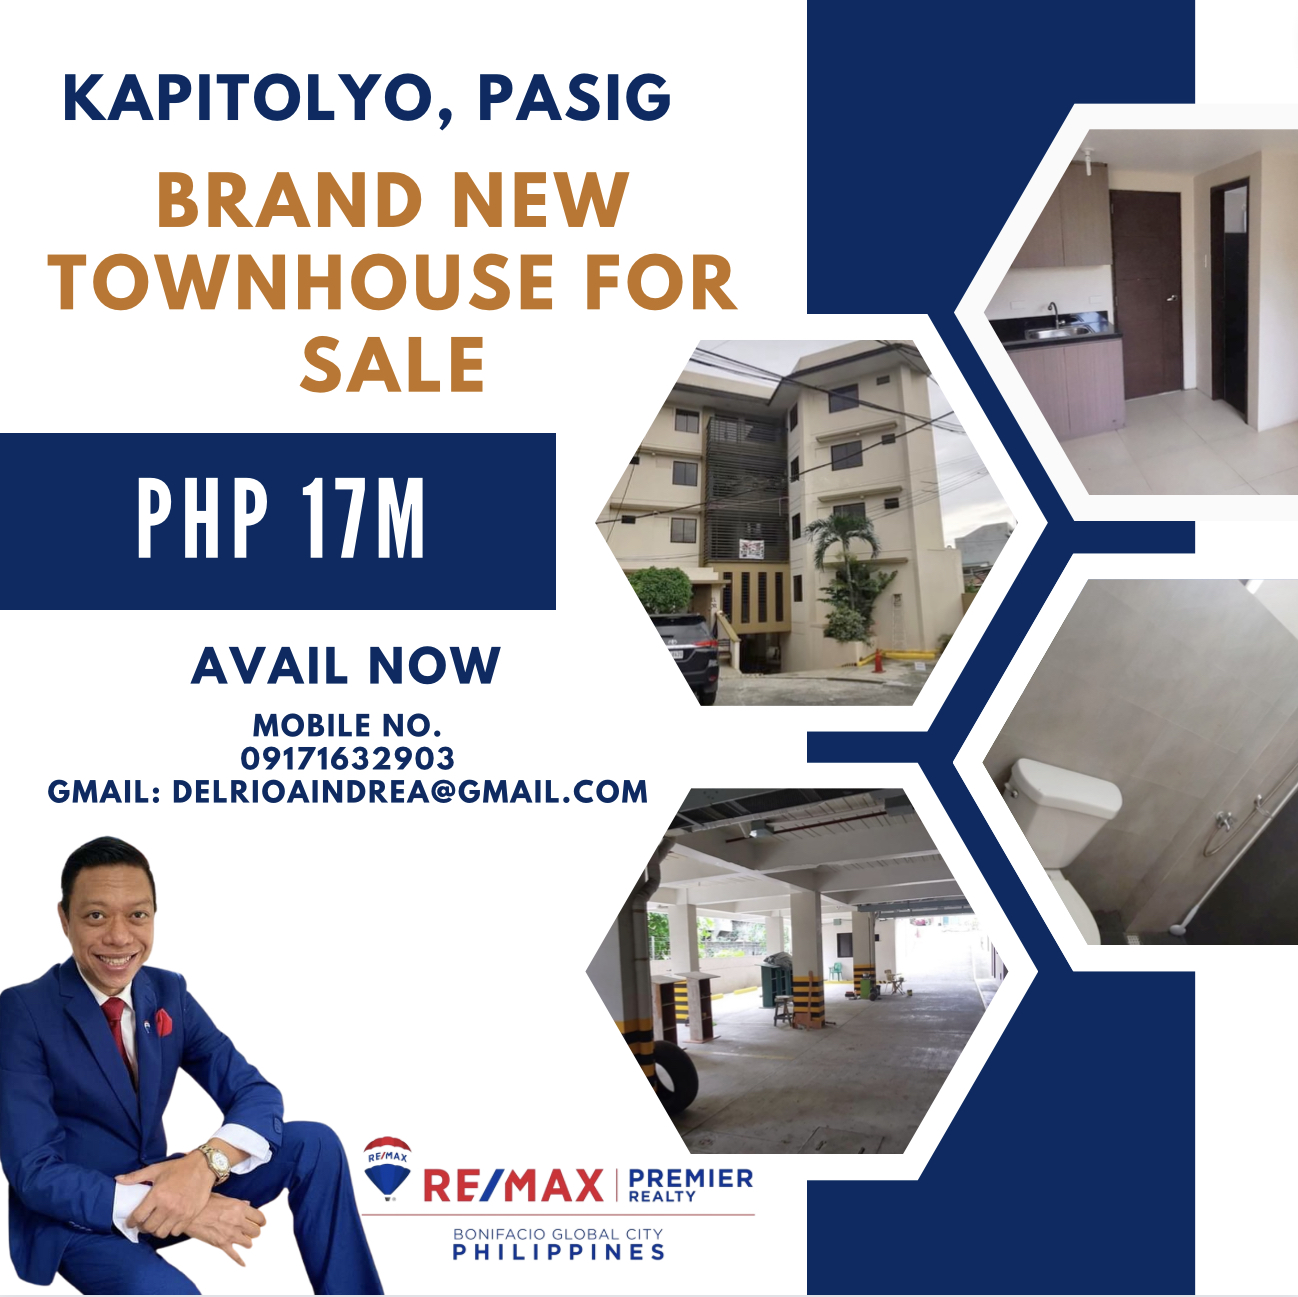 Kapitolyo, Pasig – Brand New Townhouse for Sale‼️